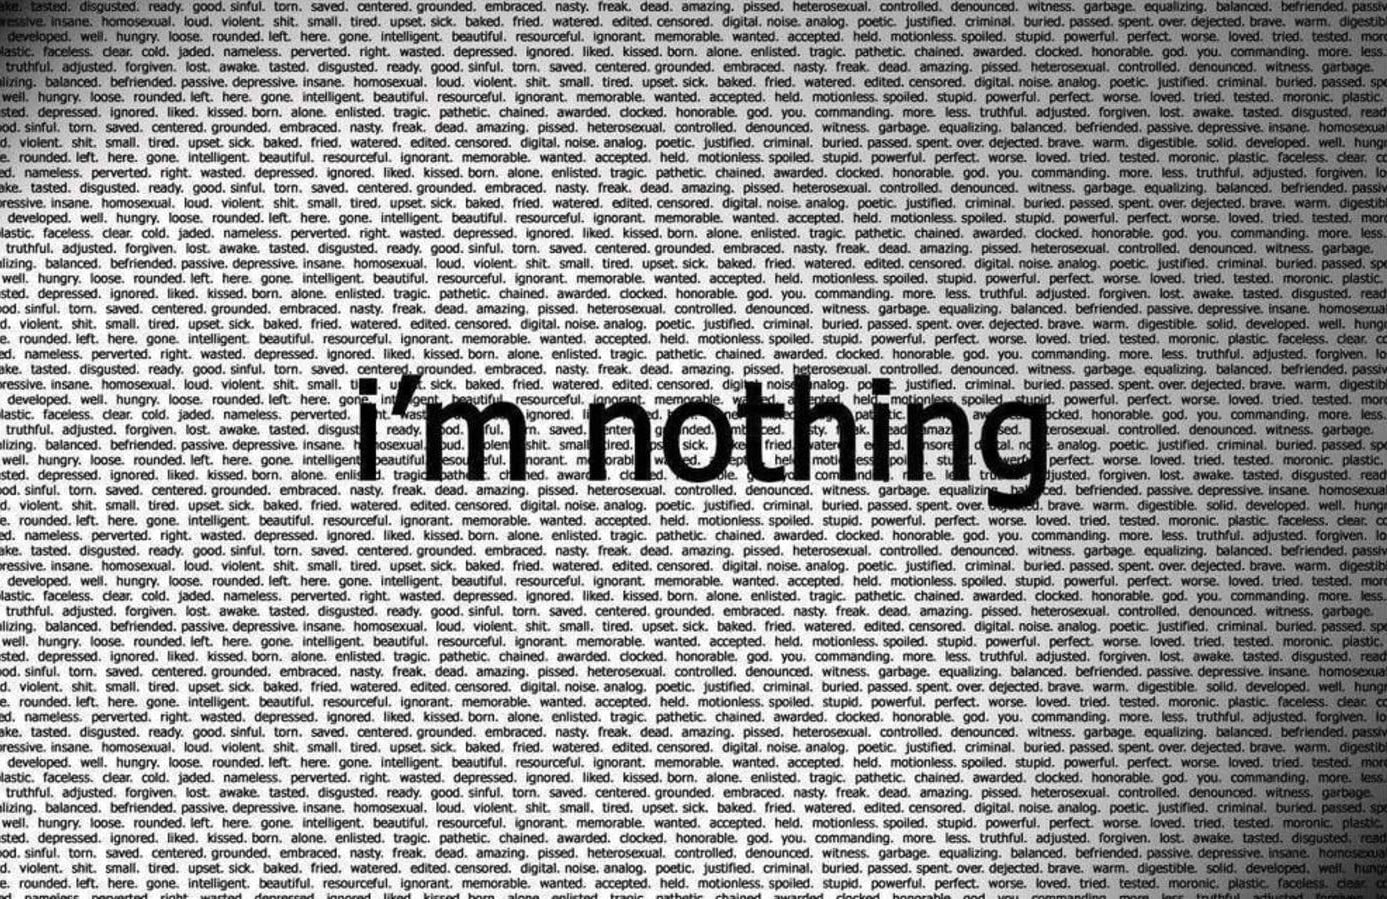 gray background with i'm nothing text overlay, paper, books, typography